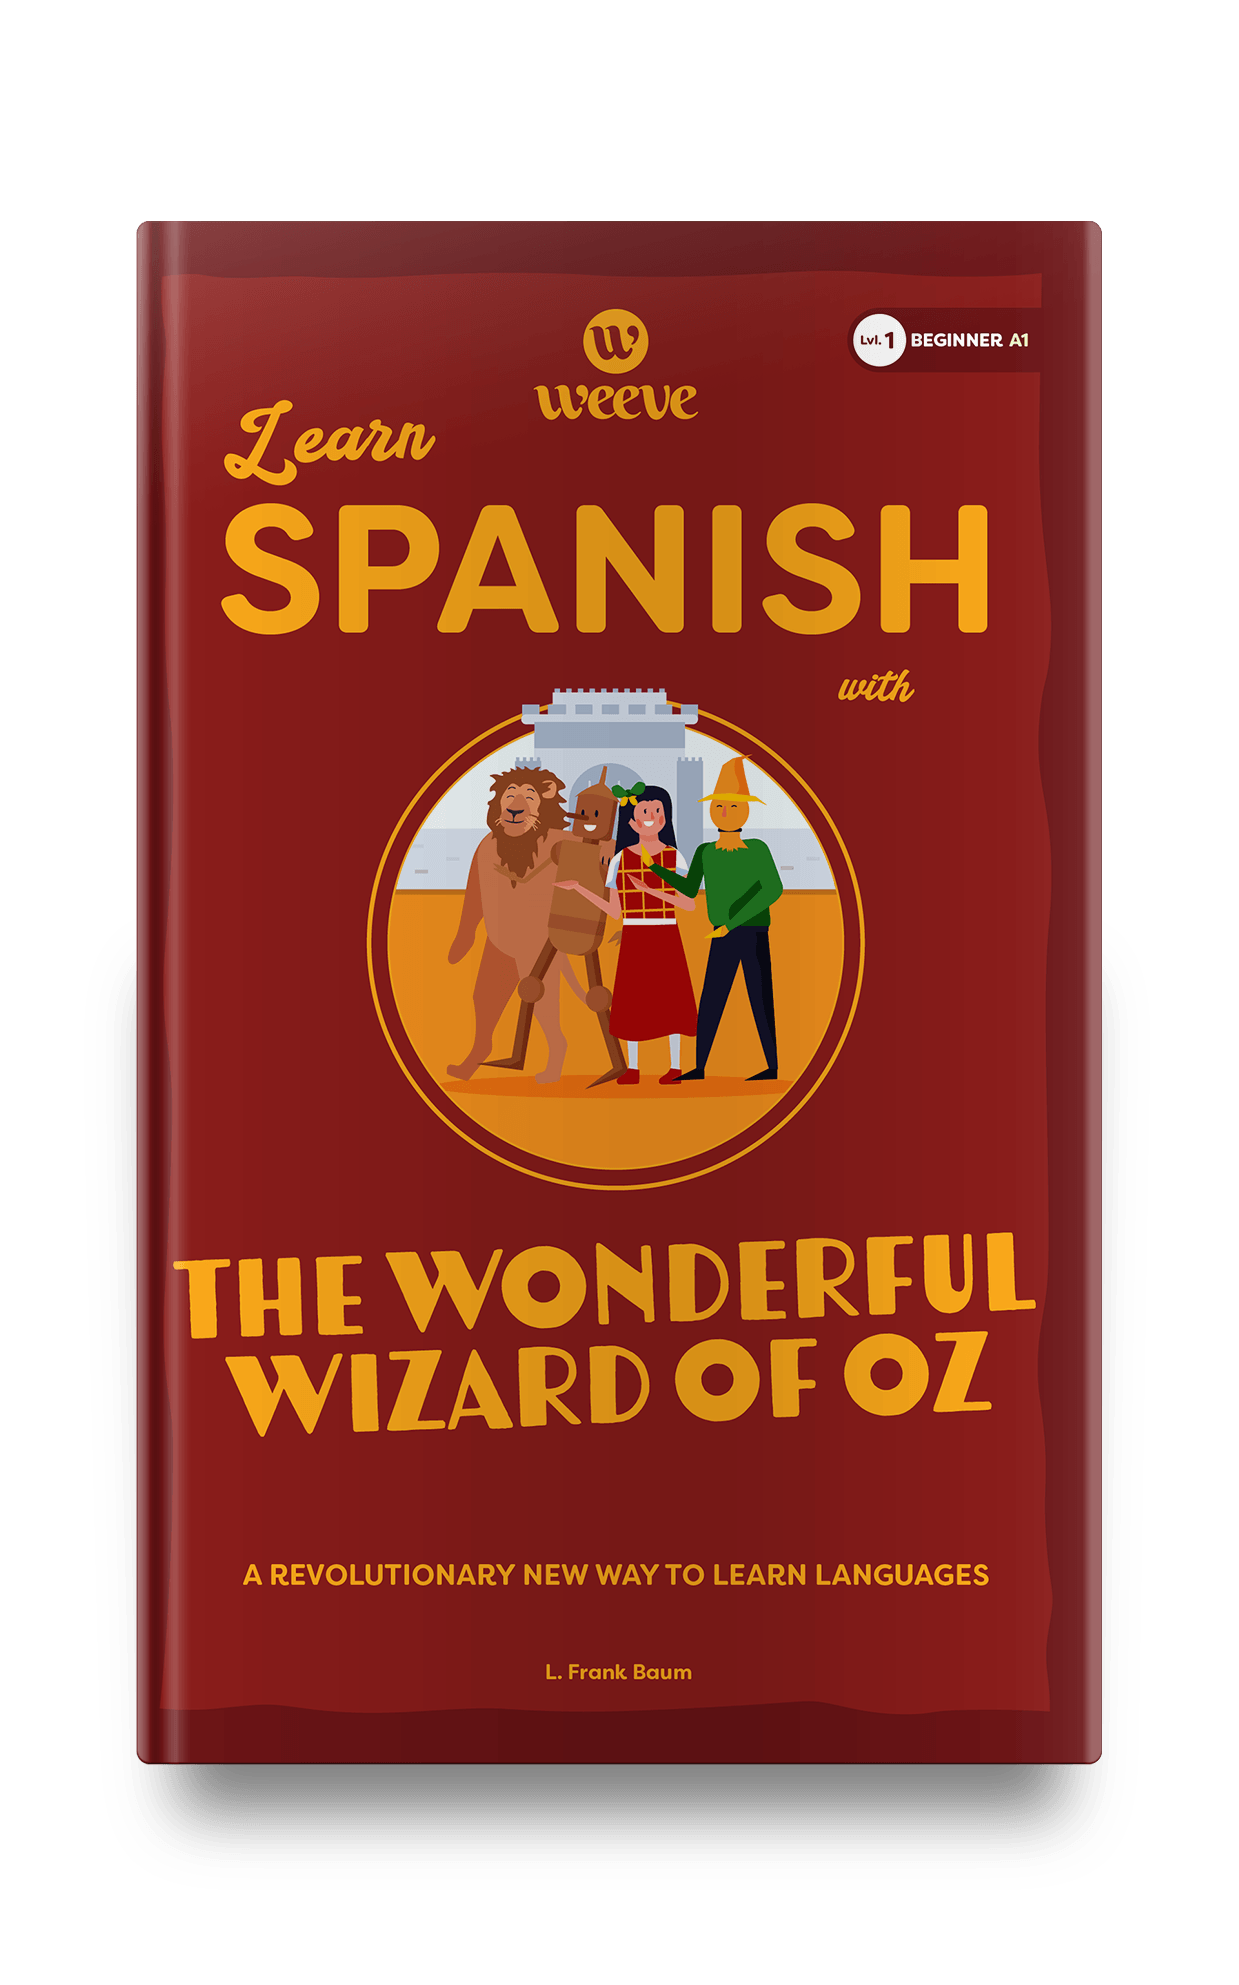 Learn Spanish with the Wonderful Wizard Of Oz - Weeve